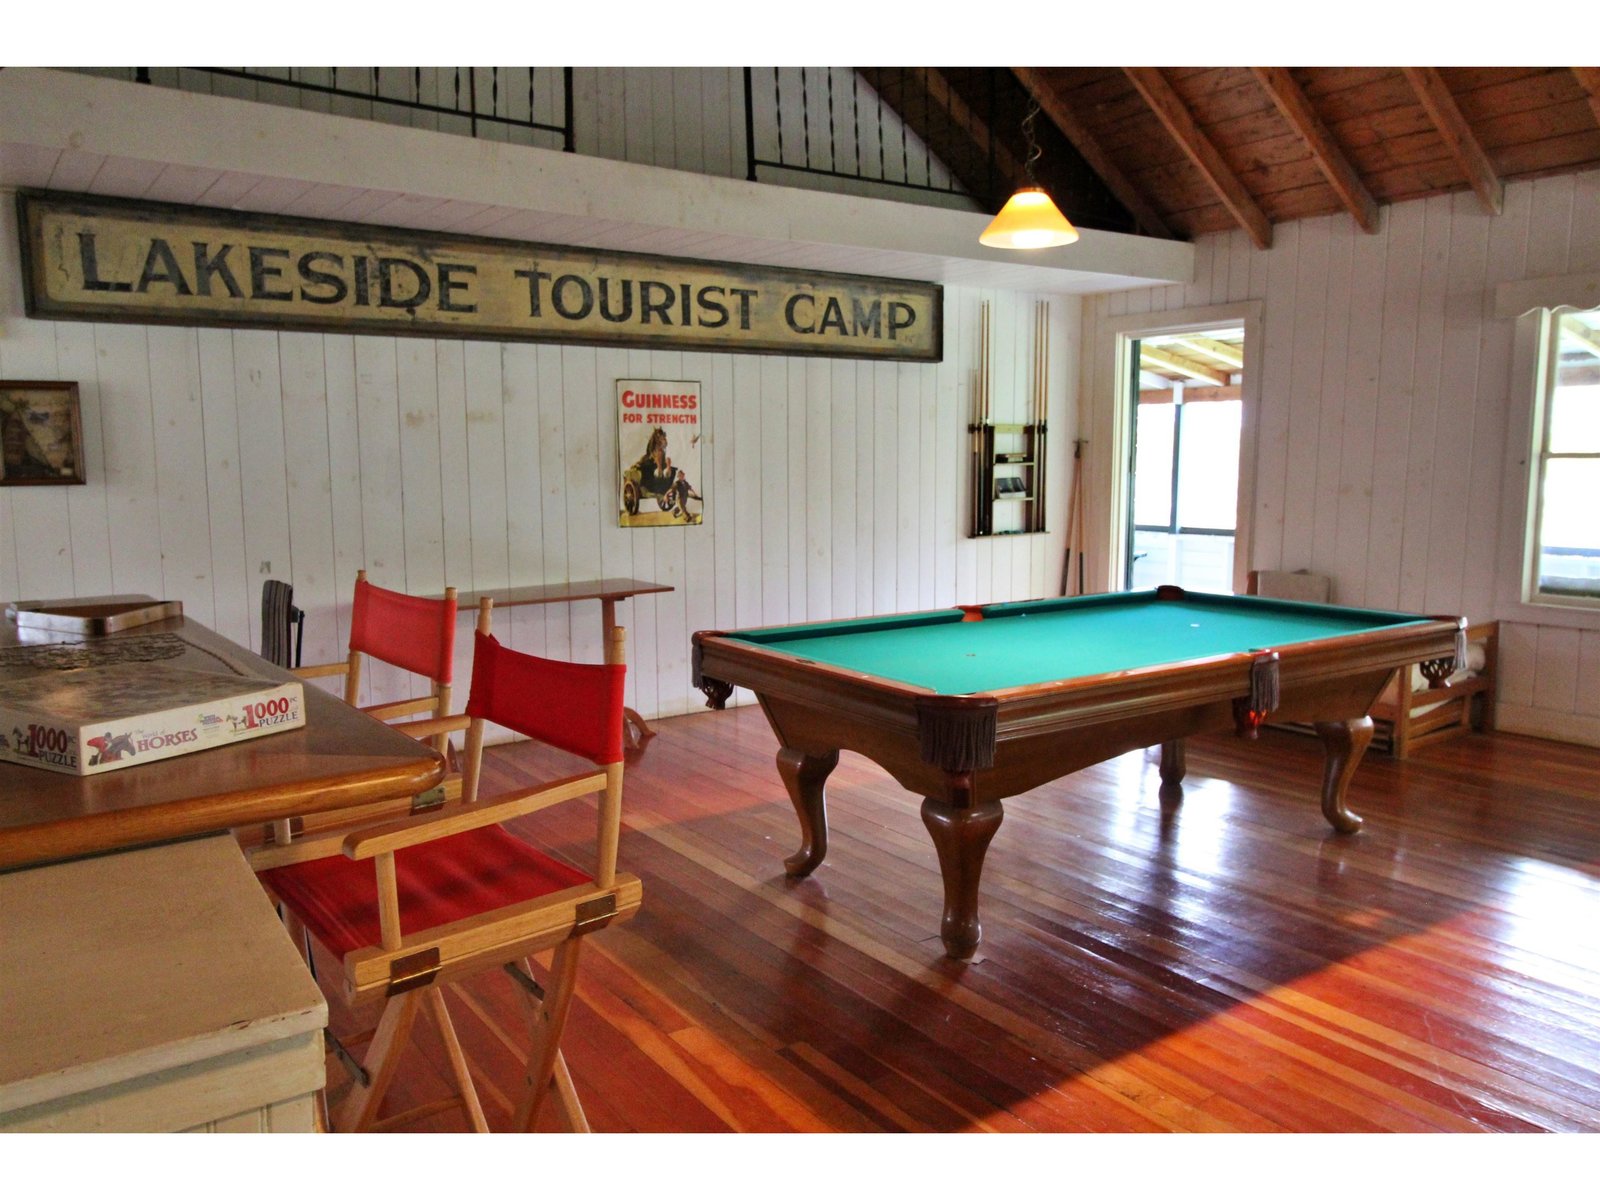 Original signage and newer pool table